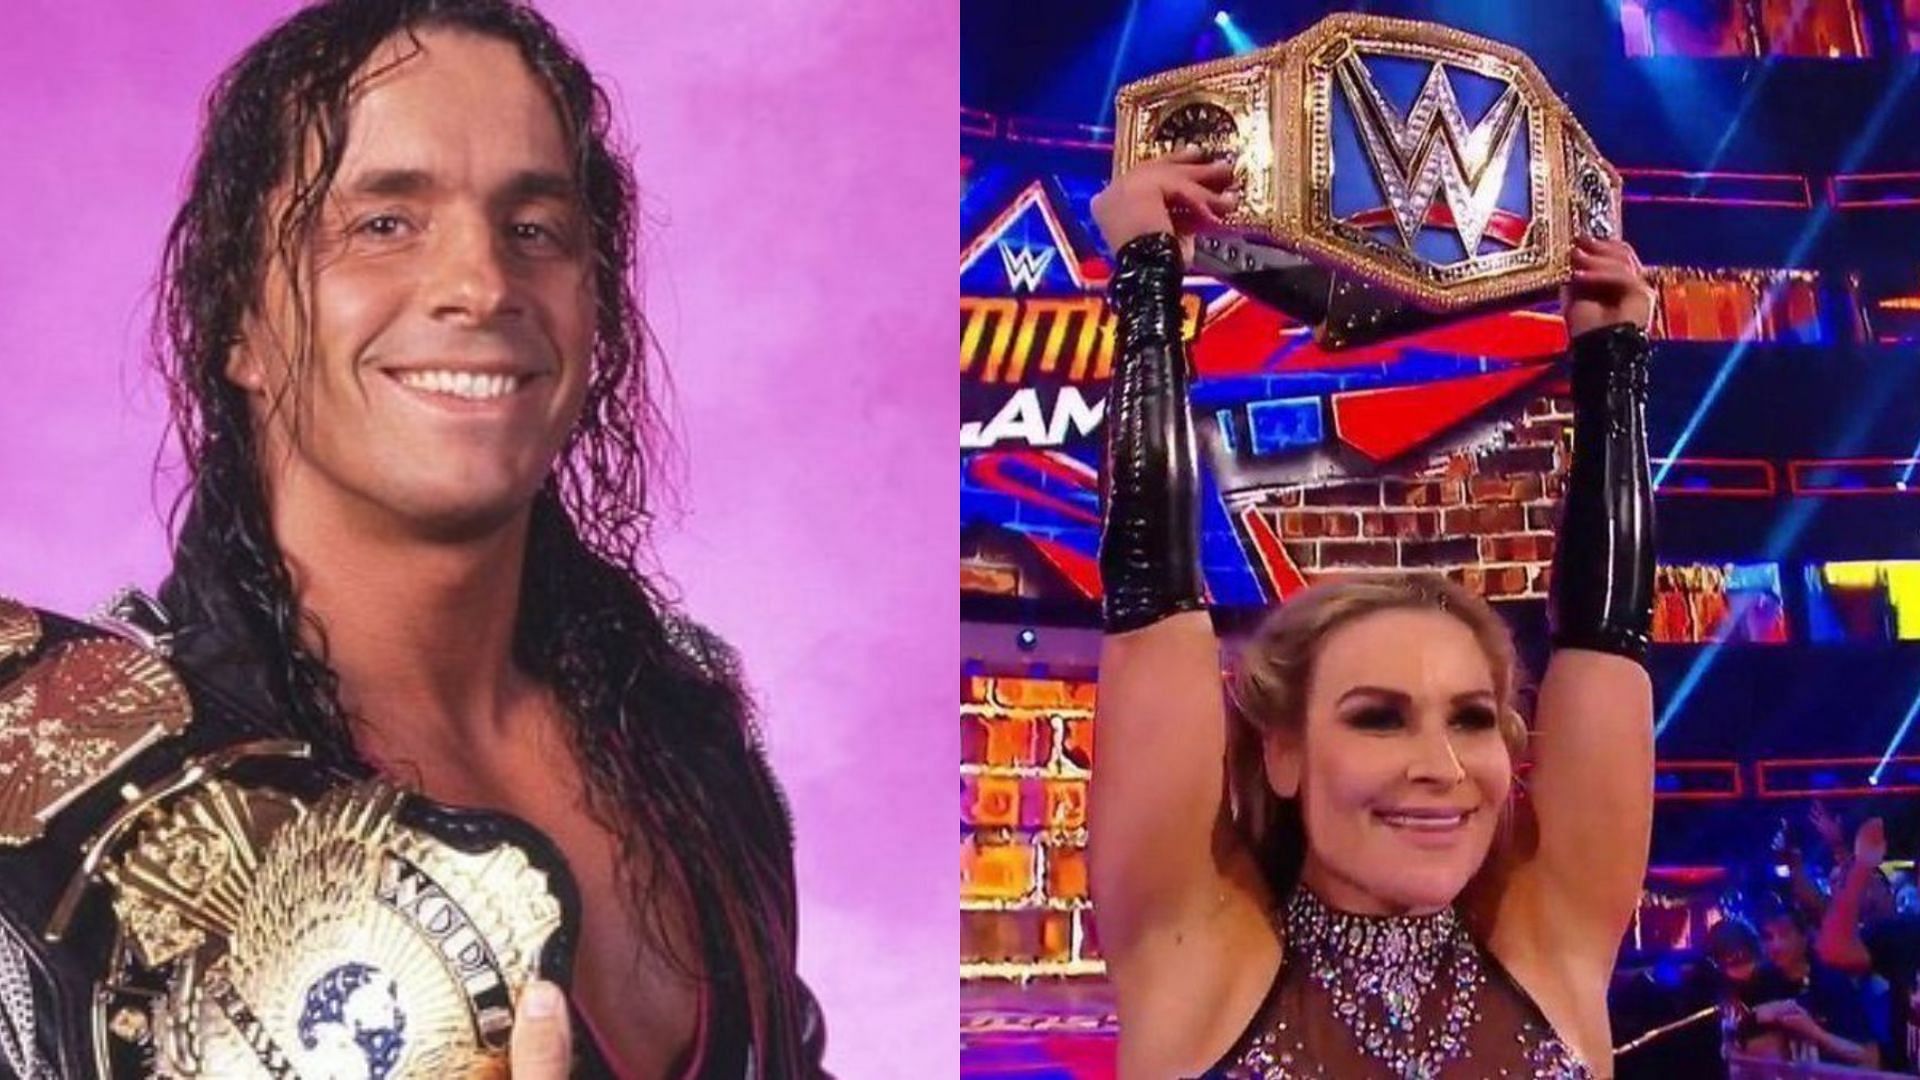 Bret Hart and Natalya are both members of The Hart Family